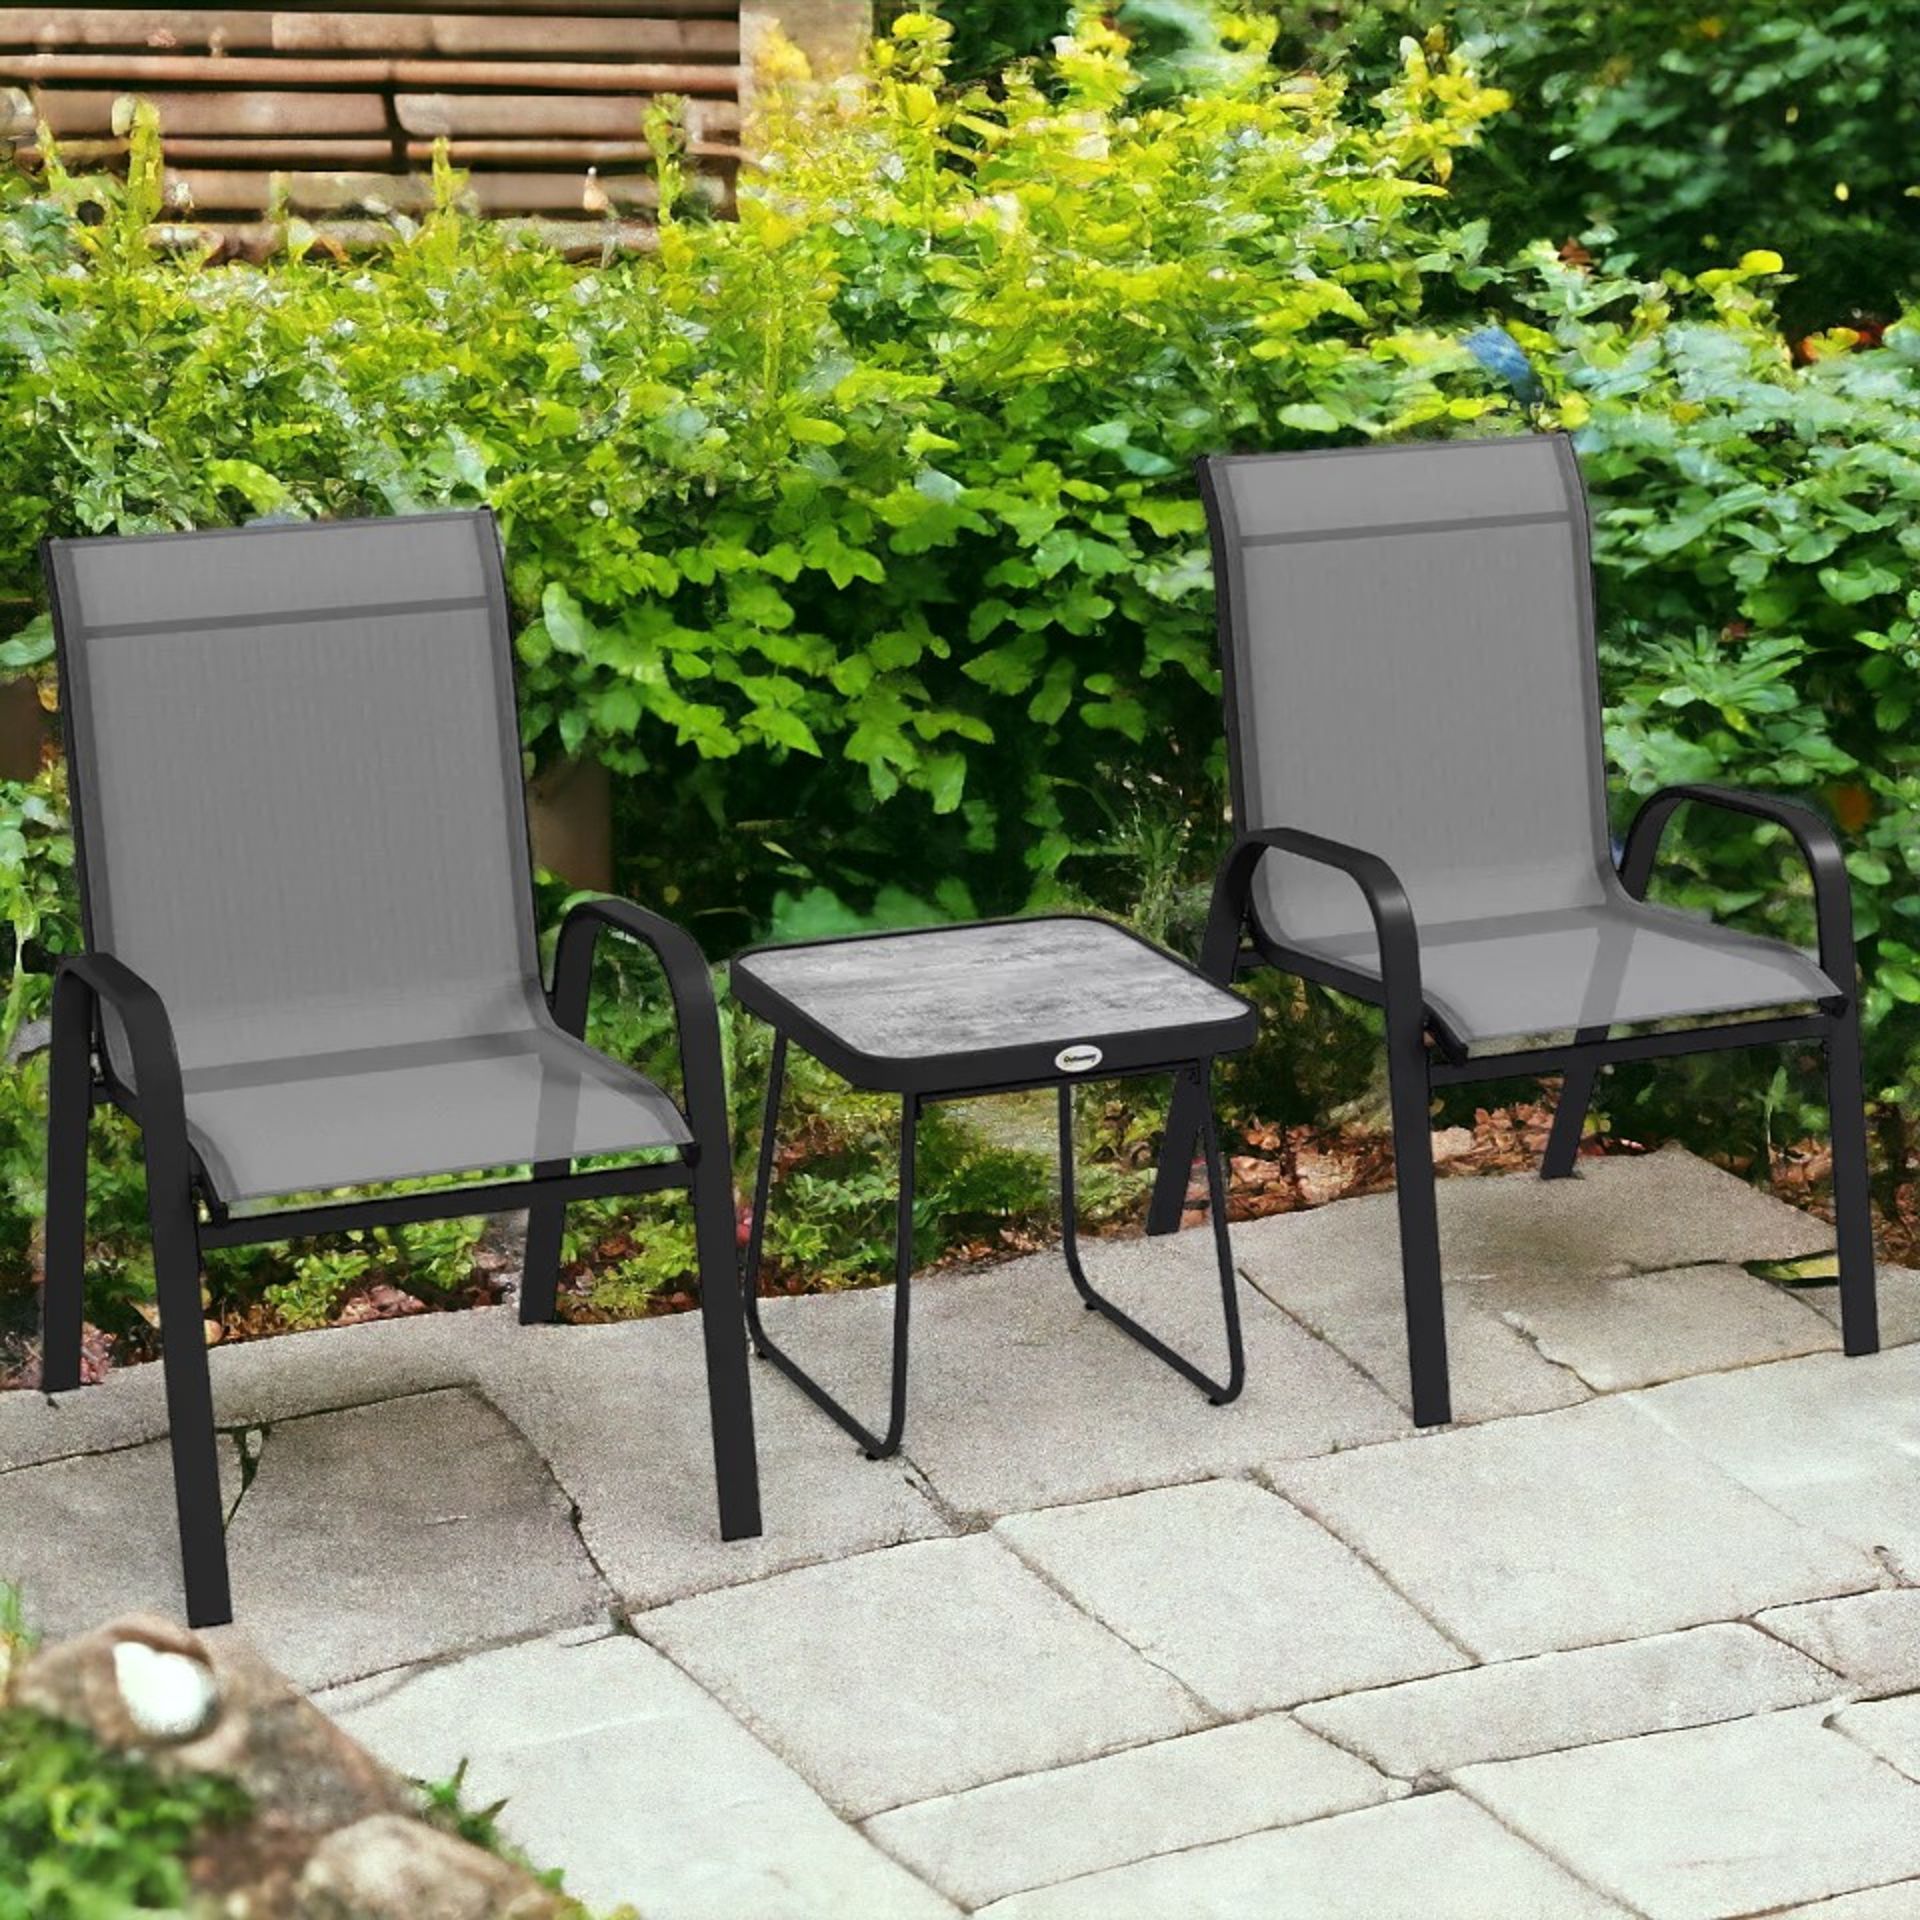 FREE DELIVERY -BRAND NEW 3PCS BISTRO SET WITH BREATHABLE MESH FABRIC STACKABLE CHAIRS LIGHT GREY - Image 2 of 2